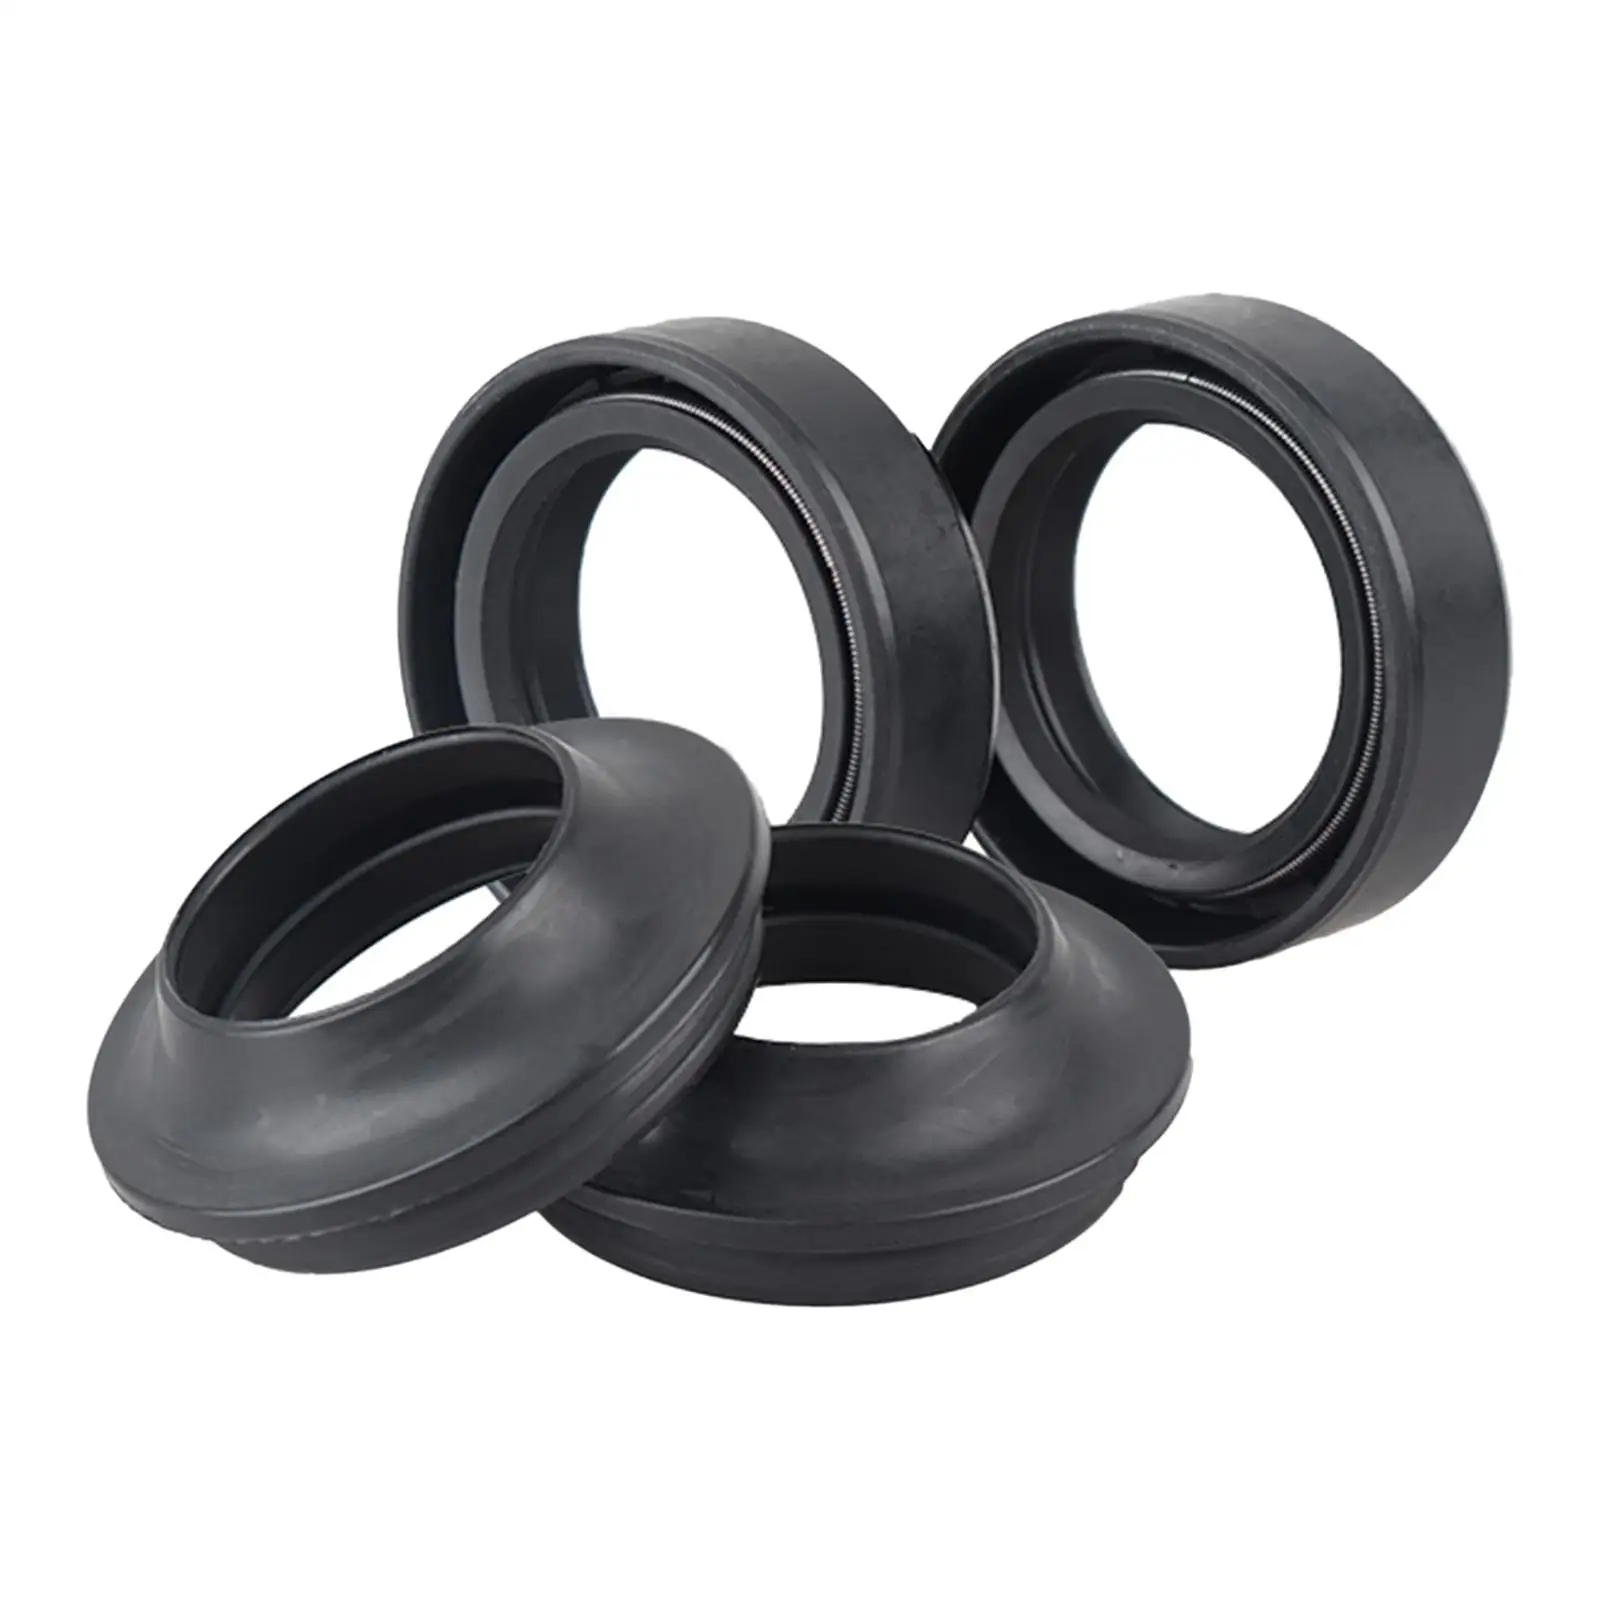 4 Pieces Front Fork Dust and Oil Seal Kit Replaces for Yamaha Yz60